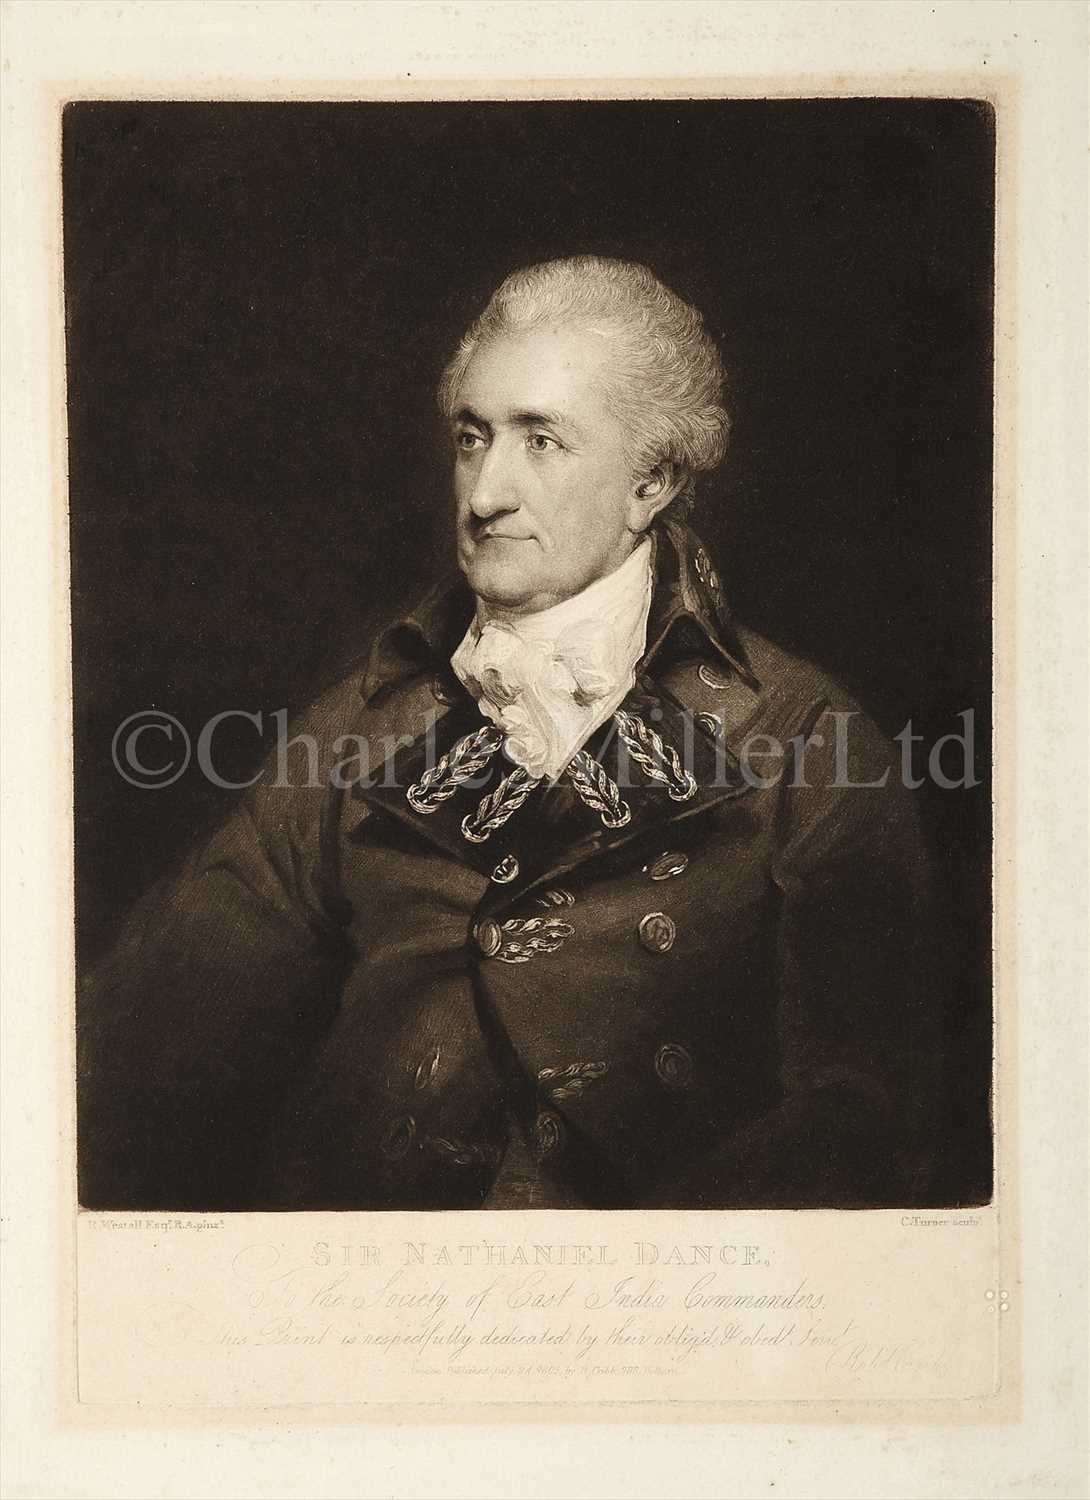 Lot 27 - 'SIR NATHANIEL DANCE'<br/>published by Charles...